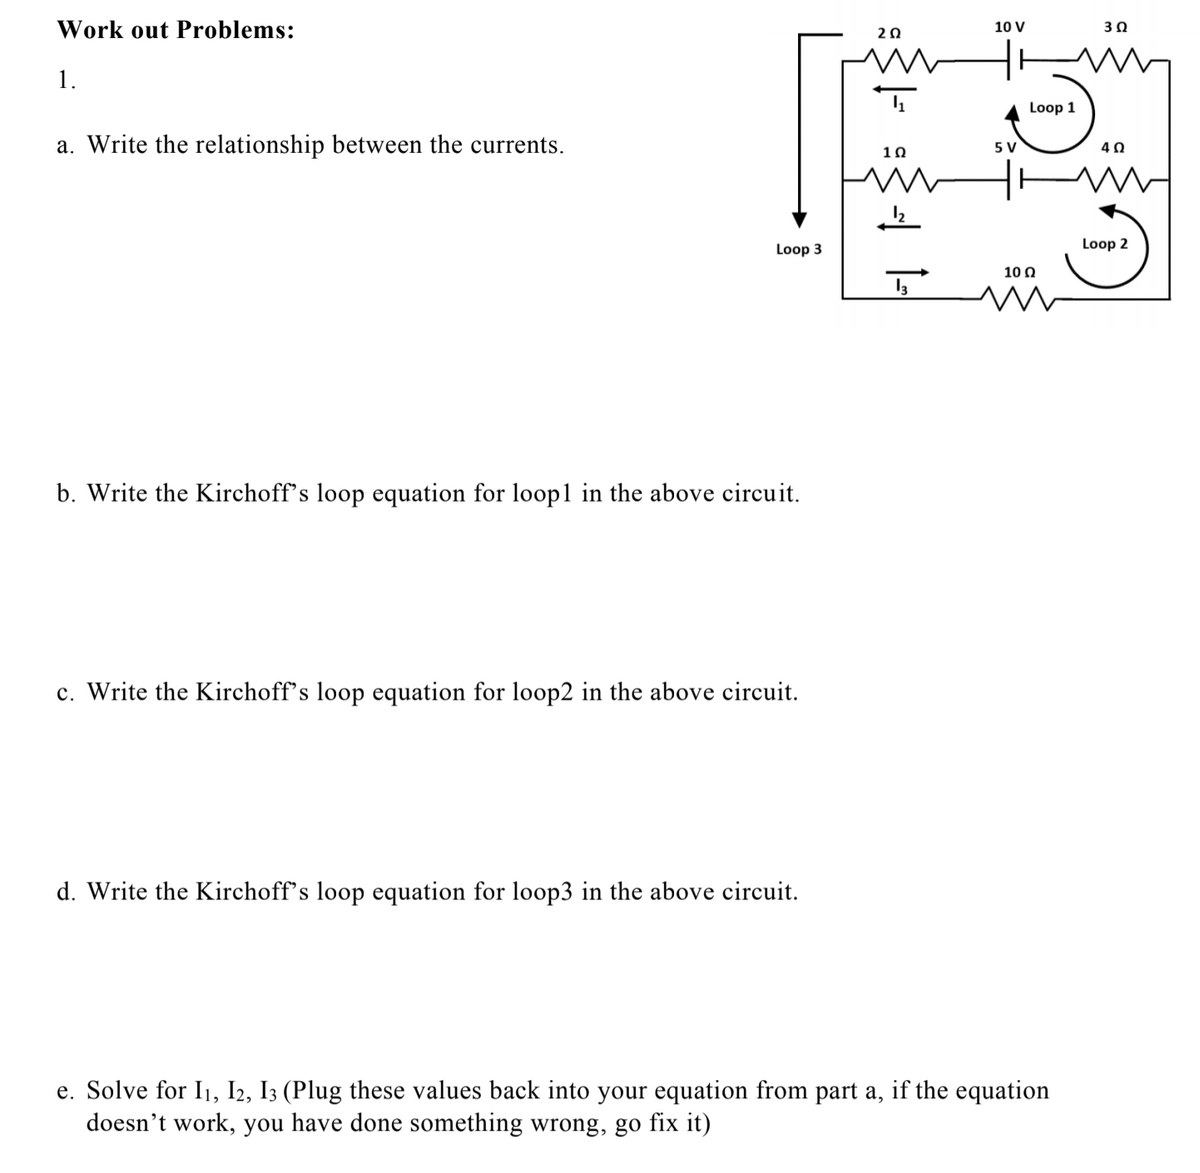 Work out Problems:
20
10 V
30
1.
Loop 1
a. Write the relationship between the currents.
5 V
10
40
Loop 3
Loop 2
10 0
b. Write the Kirchoff's loop equation for loop1 in the above circuit.
c. Write the Kirchoff's loop equation for loop2 in the above circuit.
d. Write the Kirchoff's loop equation for loop3 in the above circuit.
S
e. Solve for I1, I2, I3 (Plug these values back into your equation from part a, if the equation
doesn't work, you have done something wrong, go fix it)
